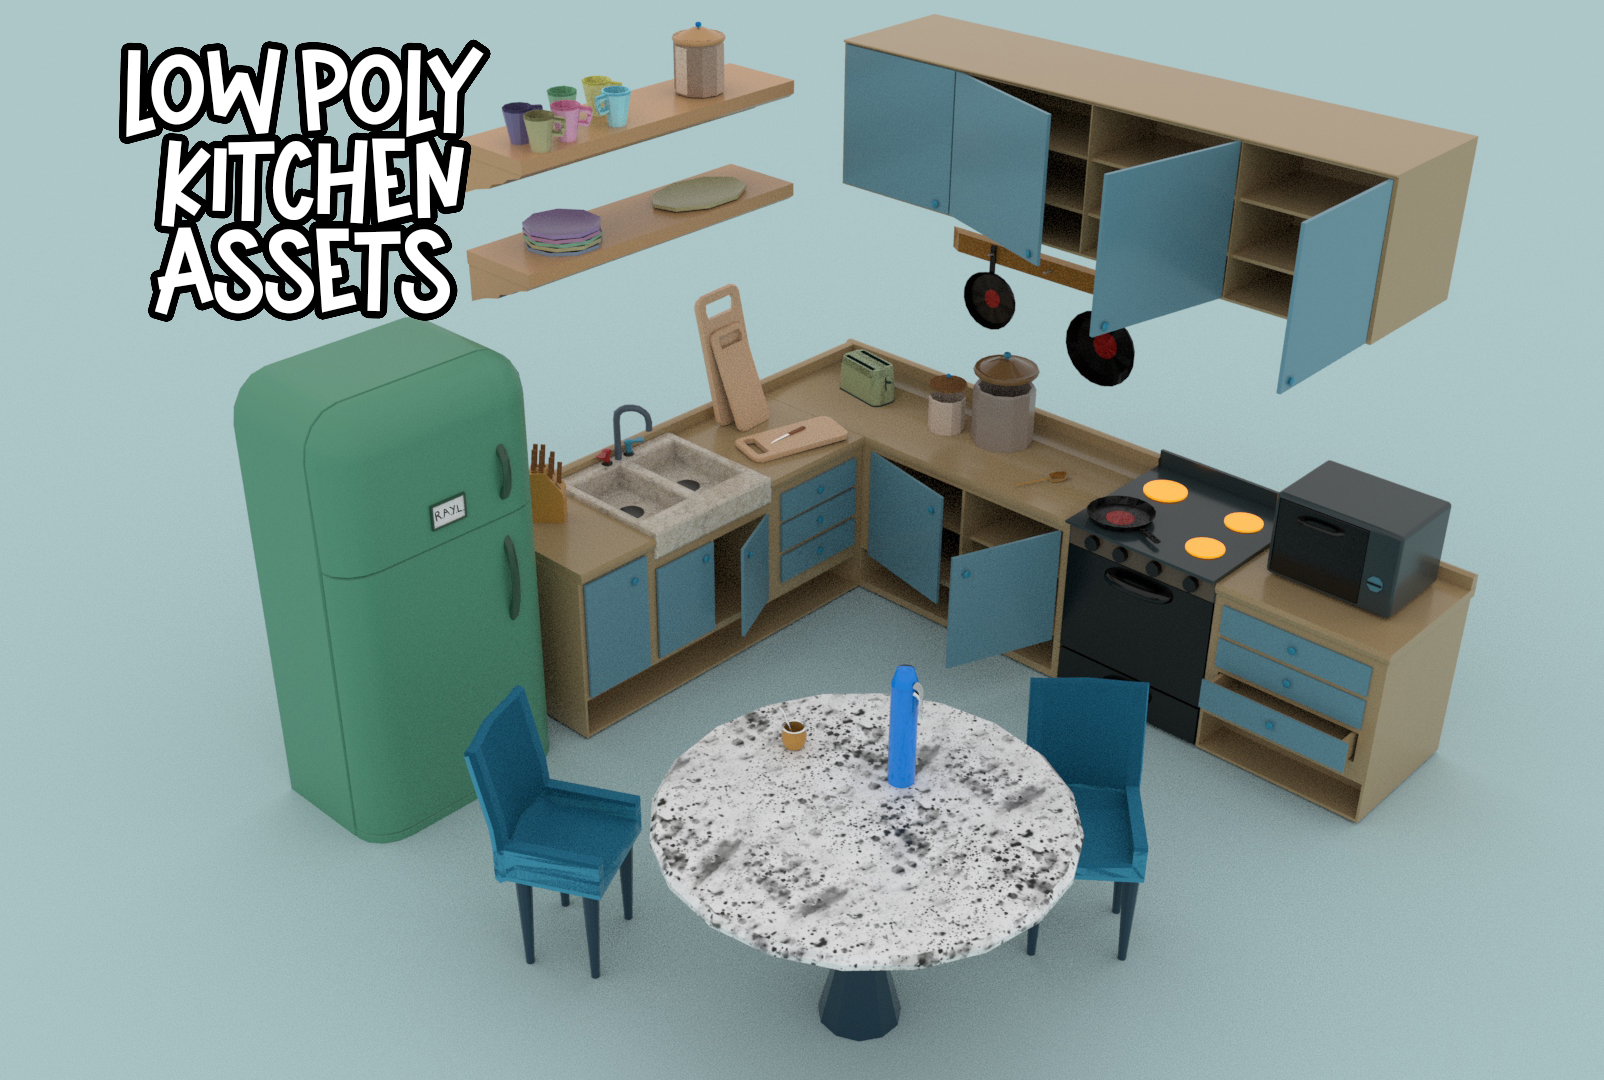 Low poly kitchen assets